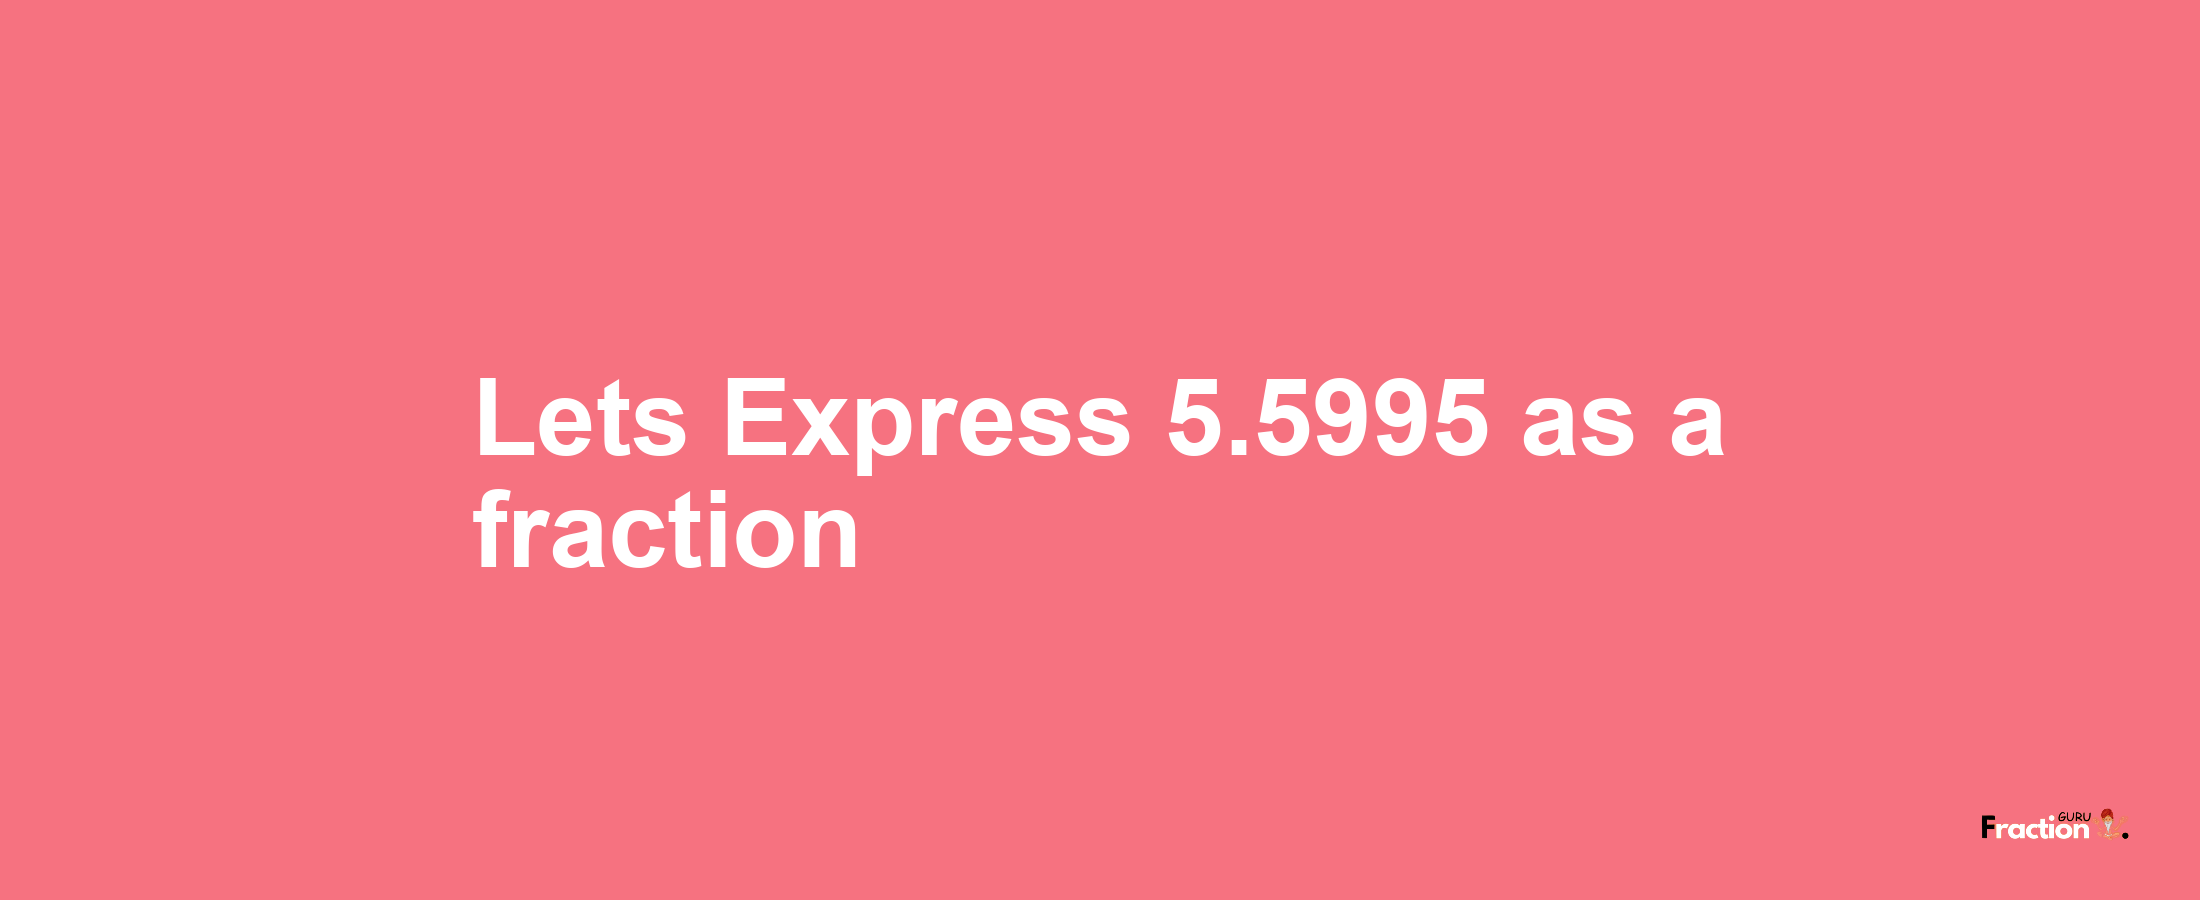 Lets Express 5.5995 as afraction